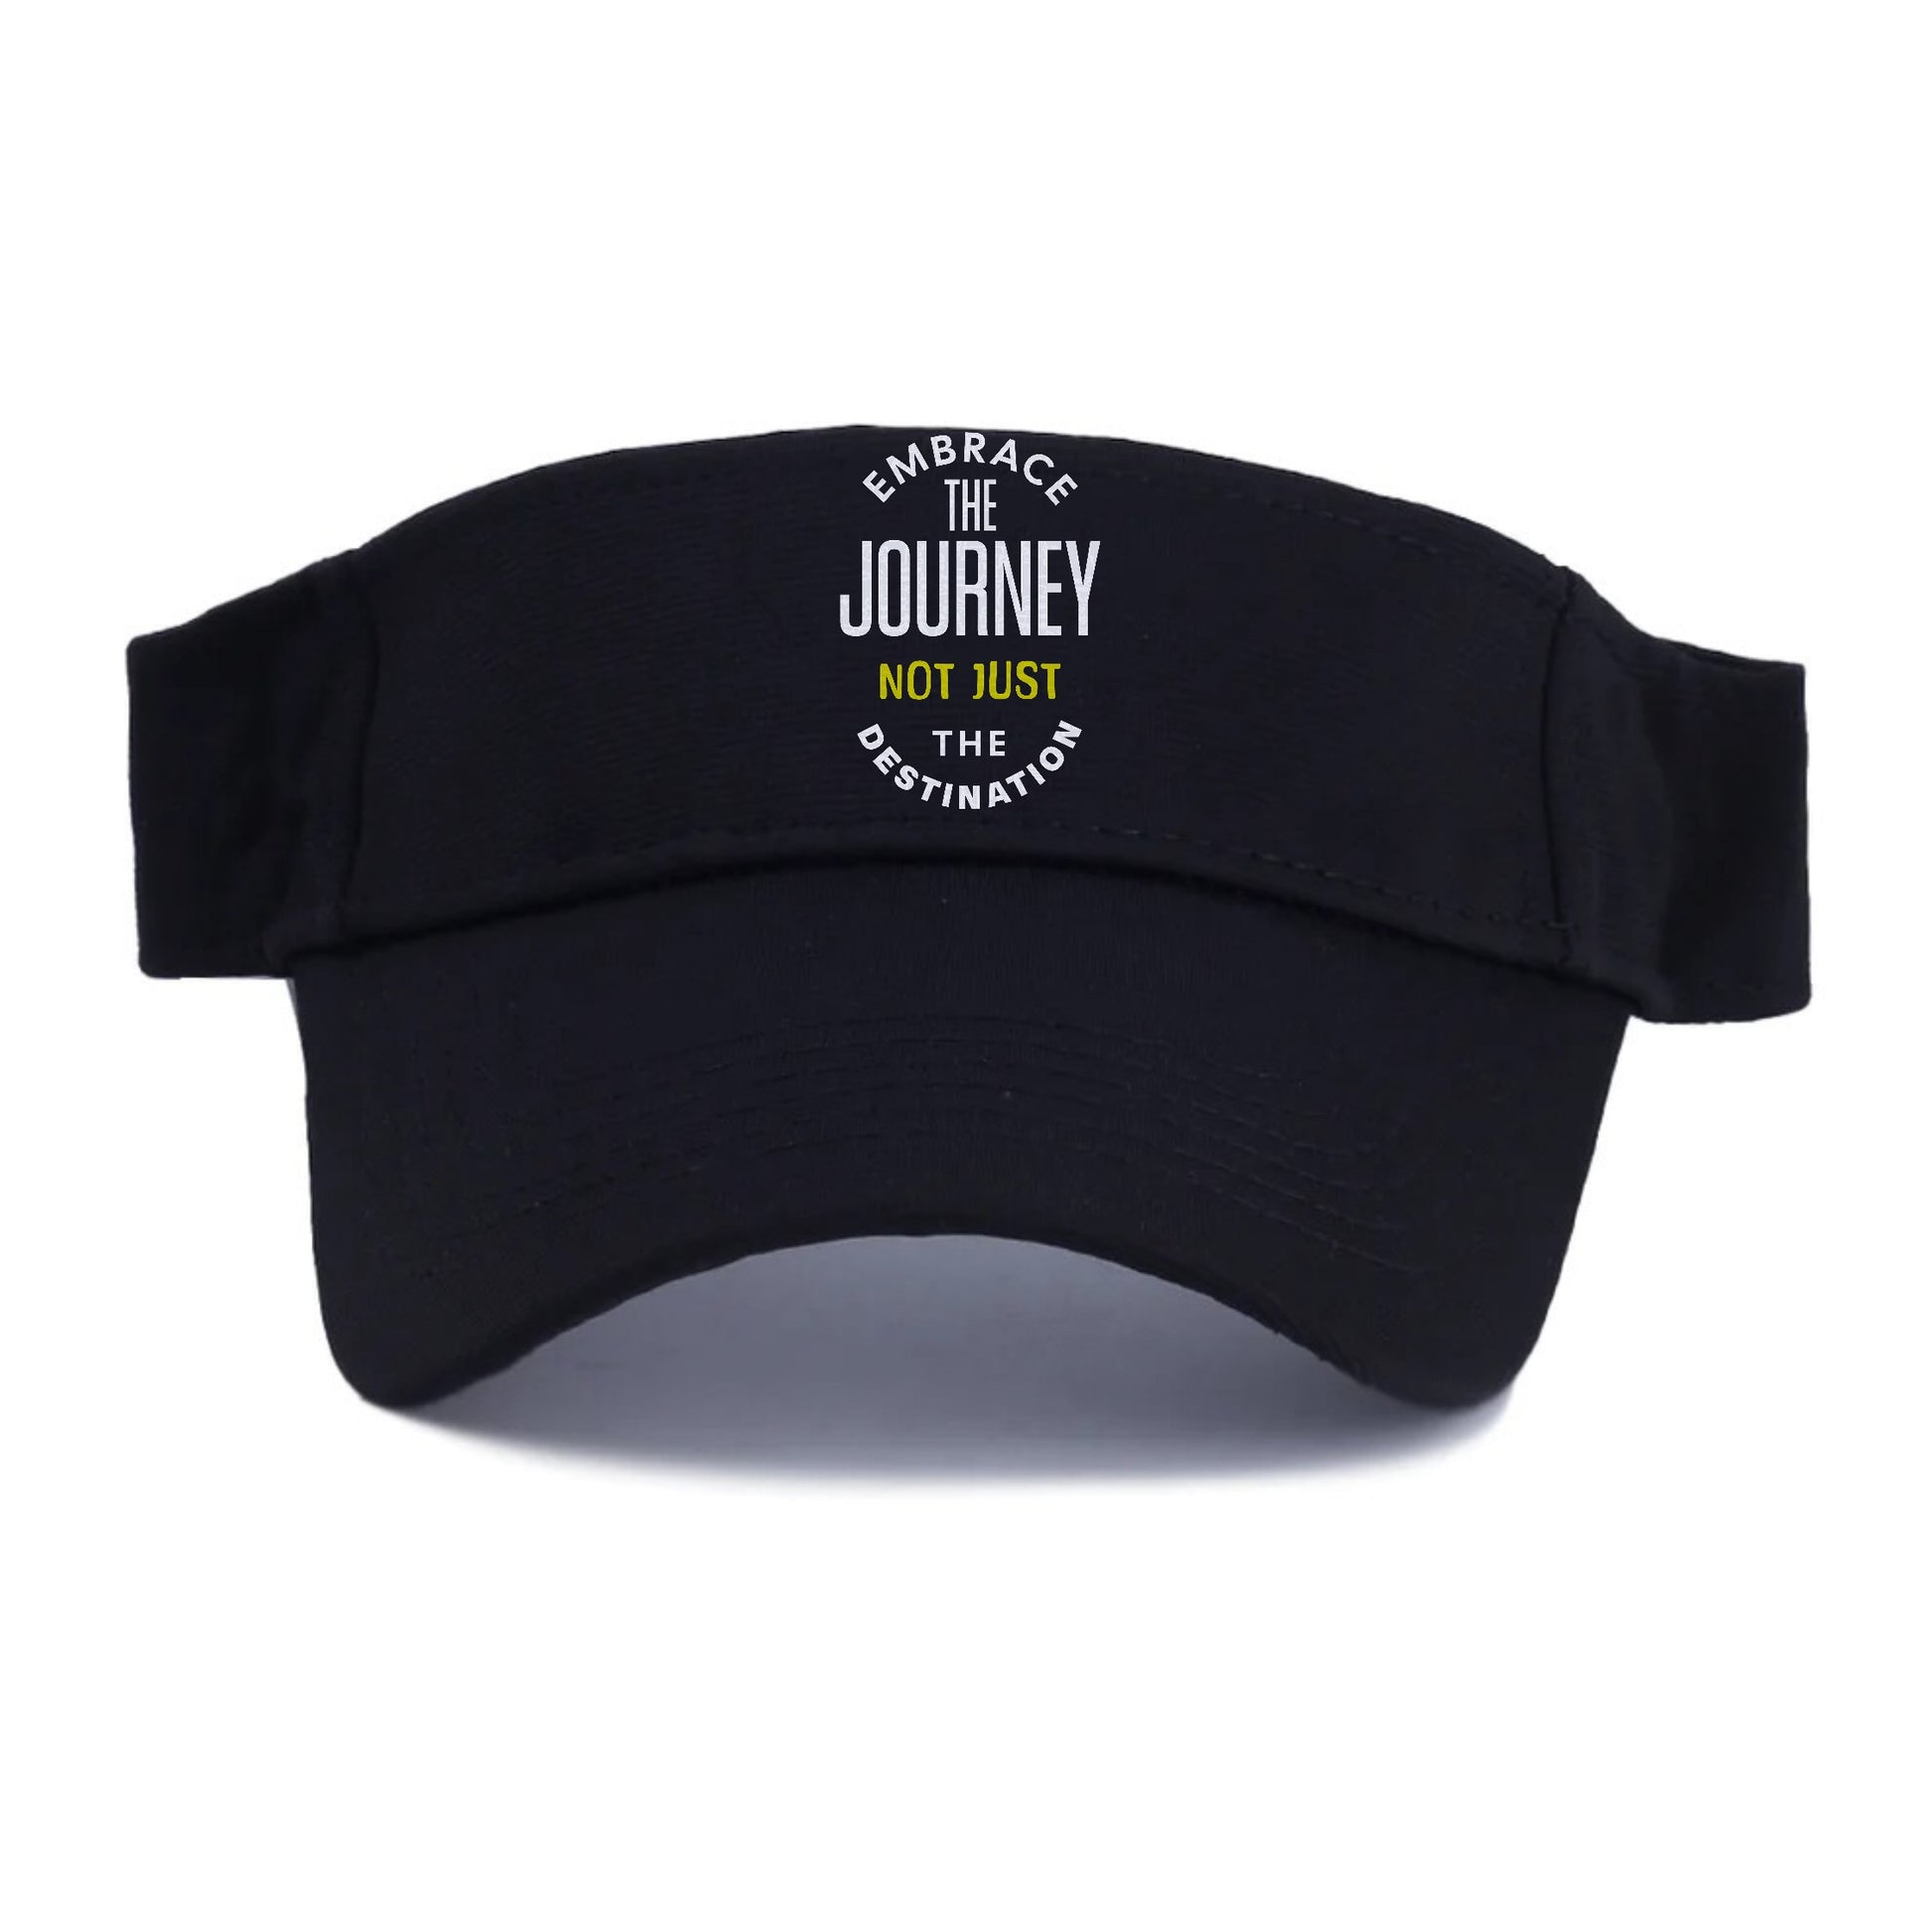 Embrace The Journey not just the destimation Hat